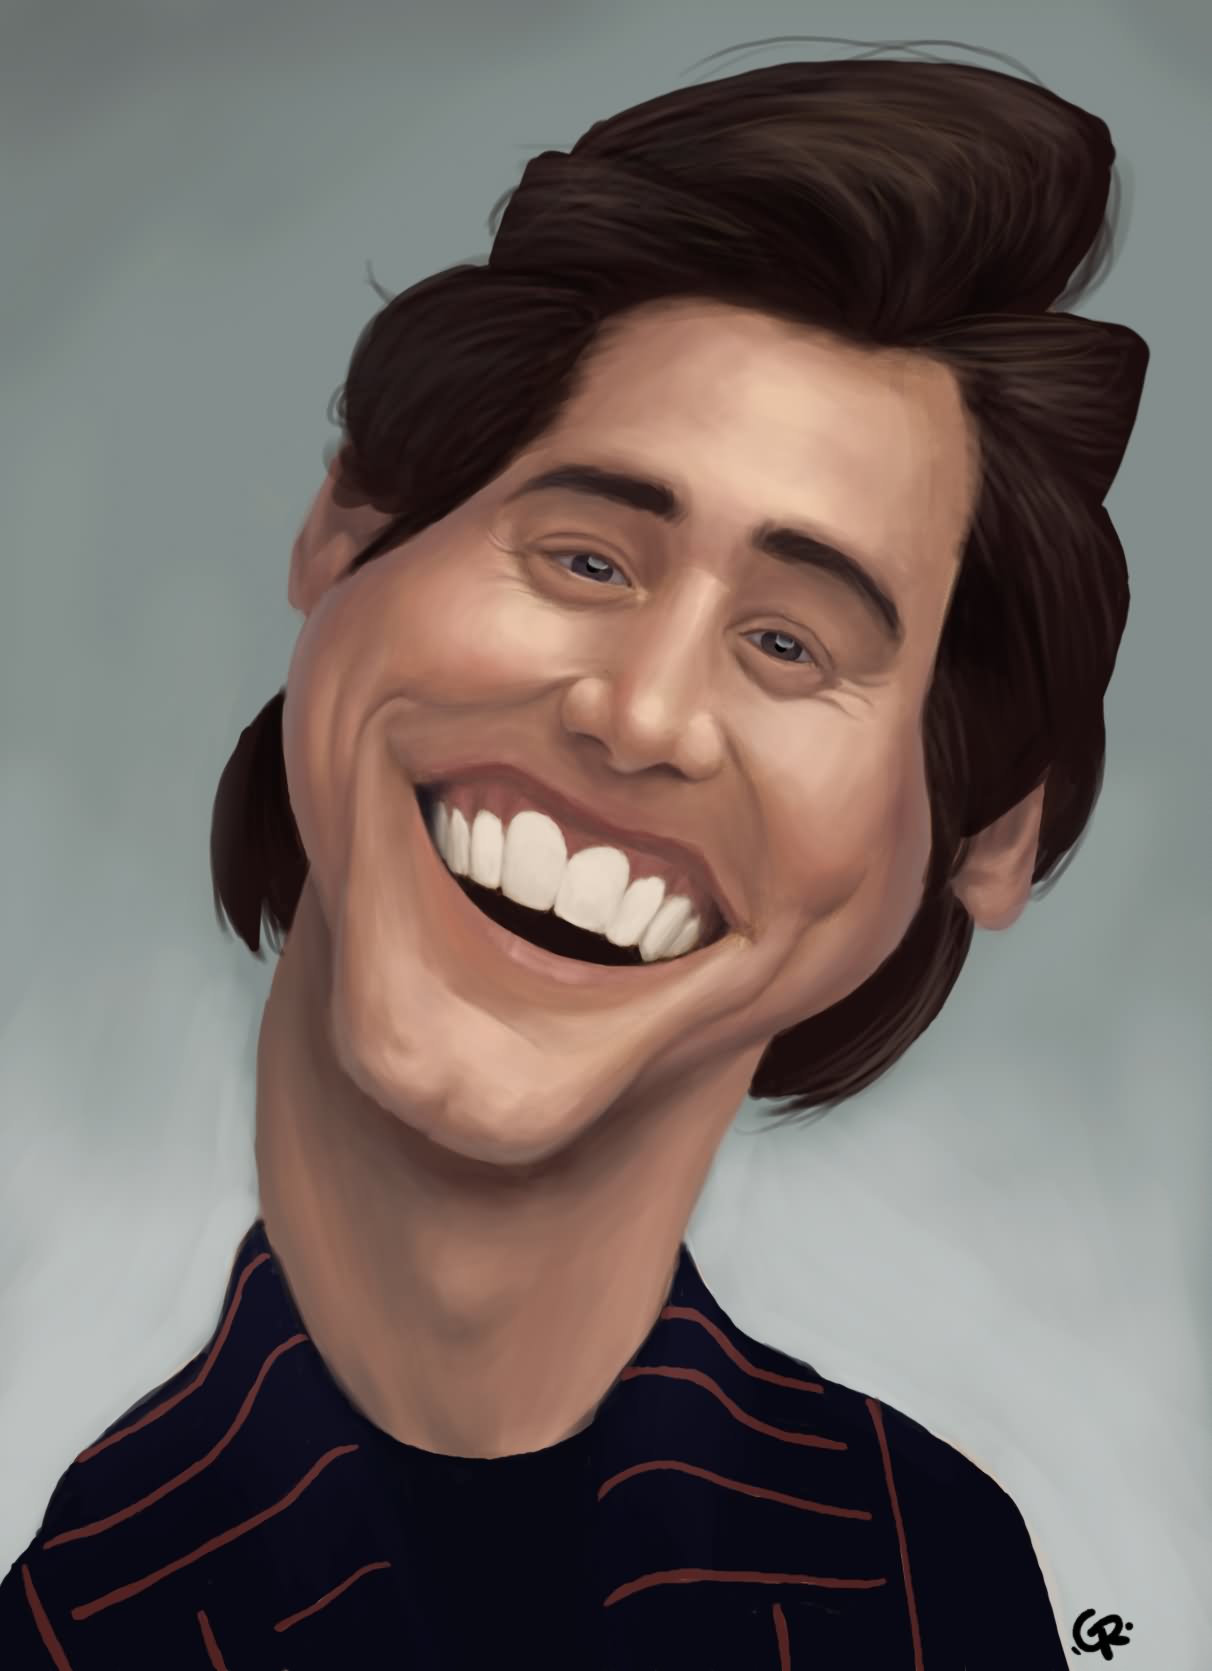 Funny Jim Carrey Caricature Face Picture